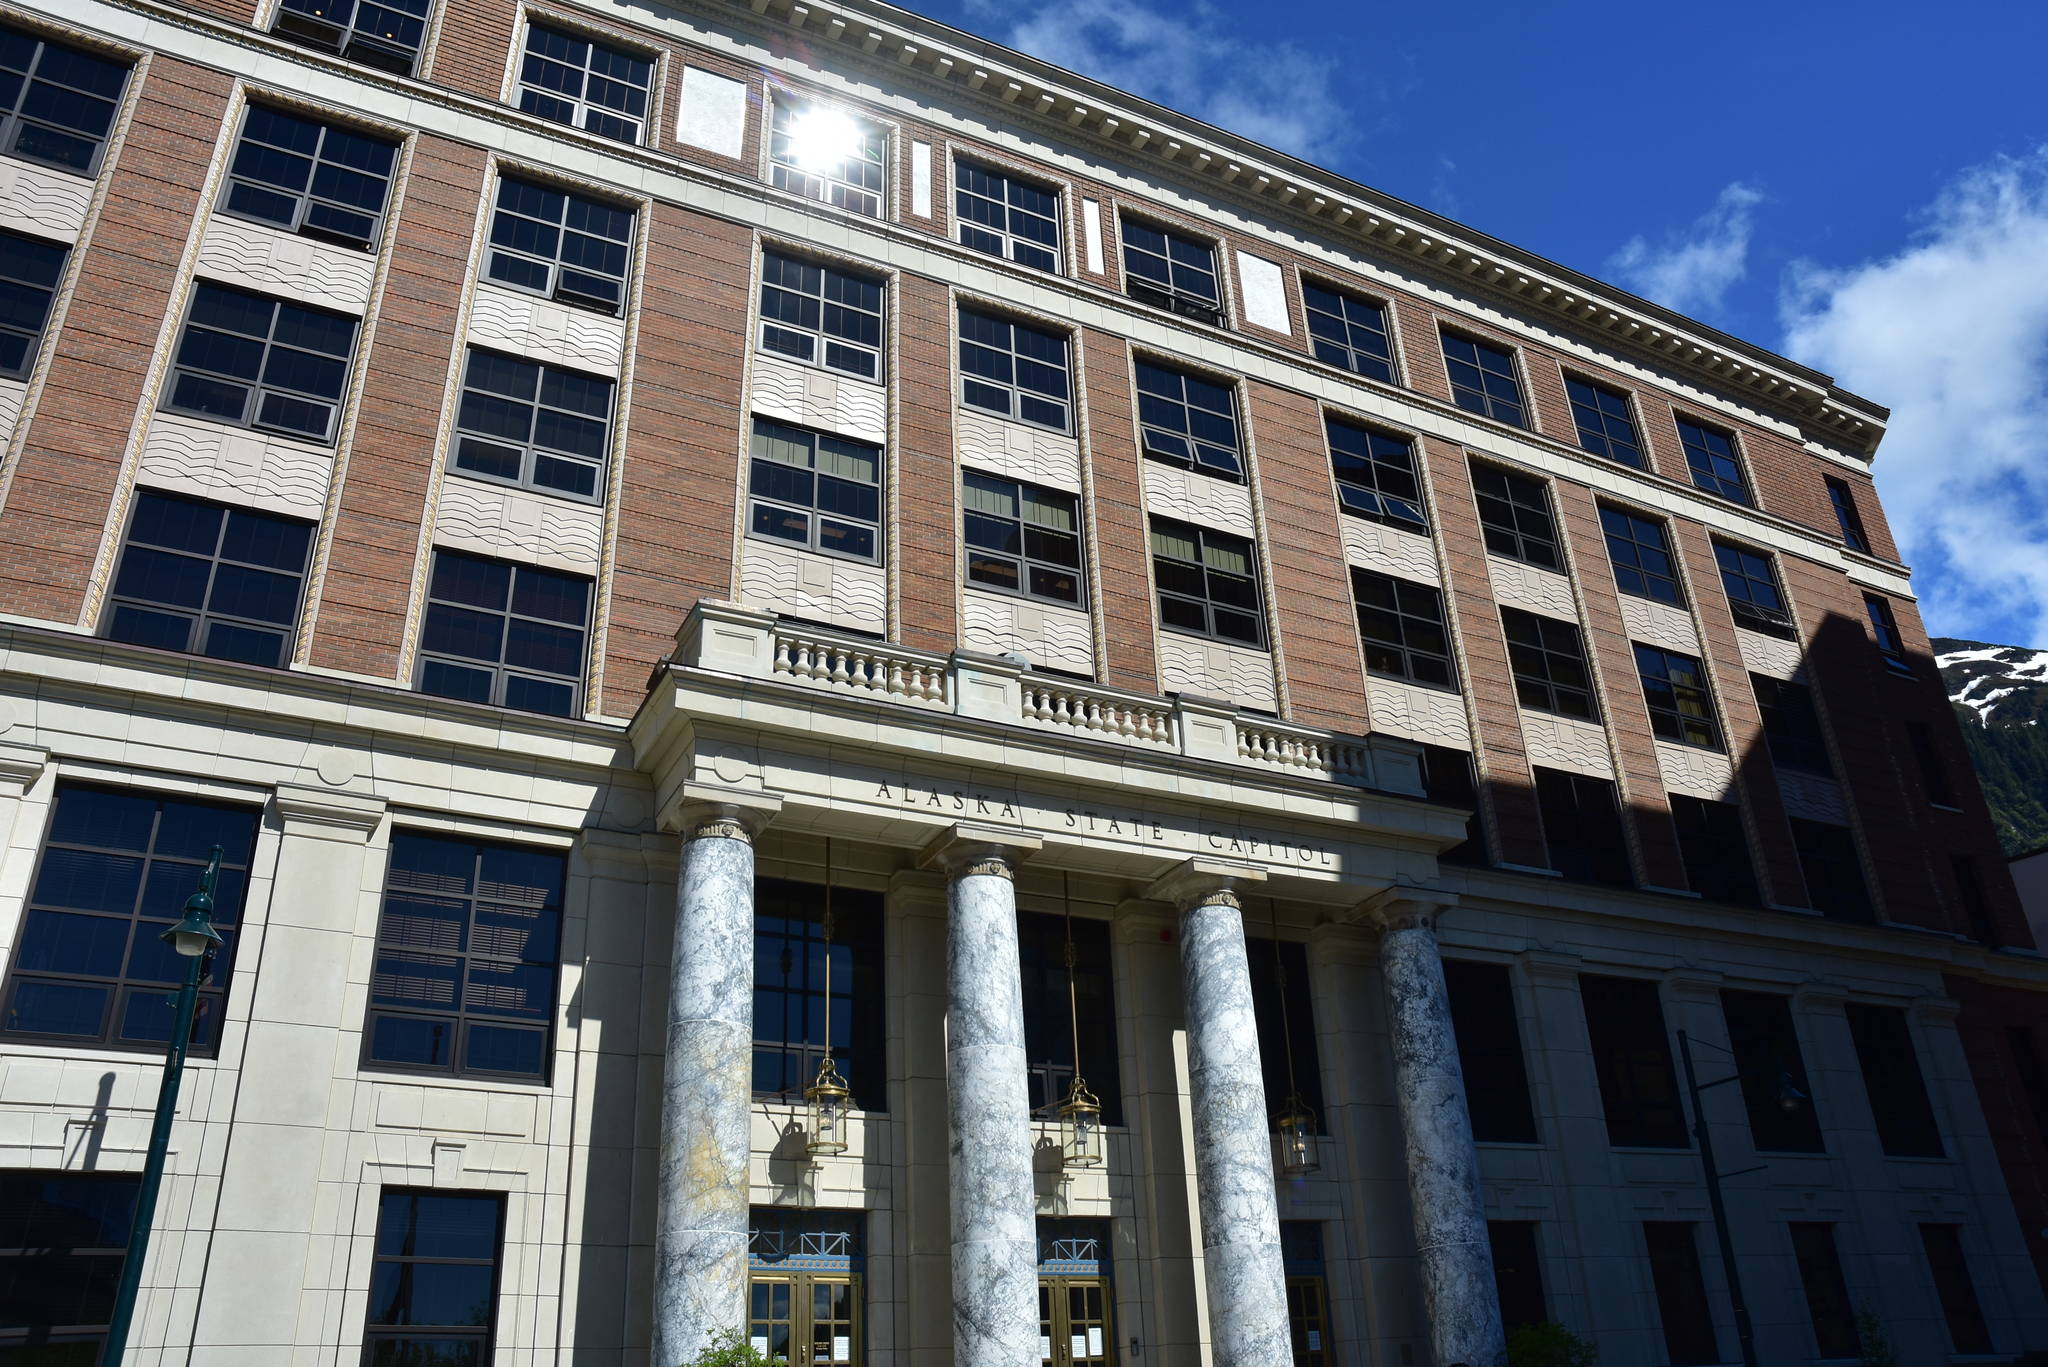 Without a budget to vote on, many lawmakers were absent from the Alaska State Capitol on Monday, June 7, 2021, as negotiations continue in committee. But even the conference committee isn't scheduled until later in the week as deep divisions among lawmakers remain. (Peter Segall / Juneau Empire)